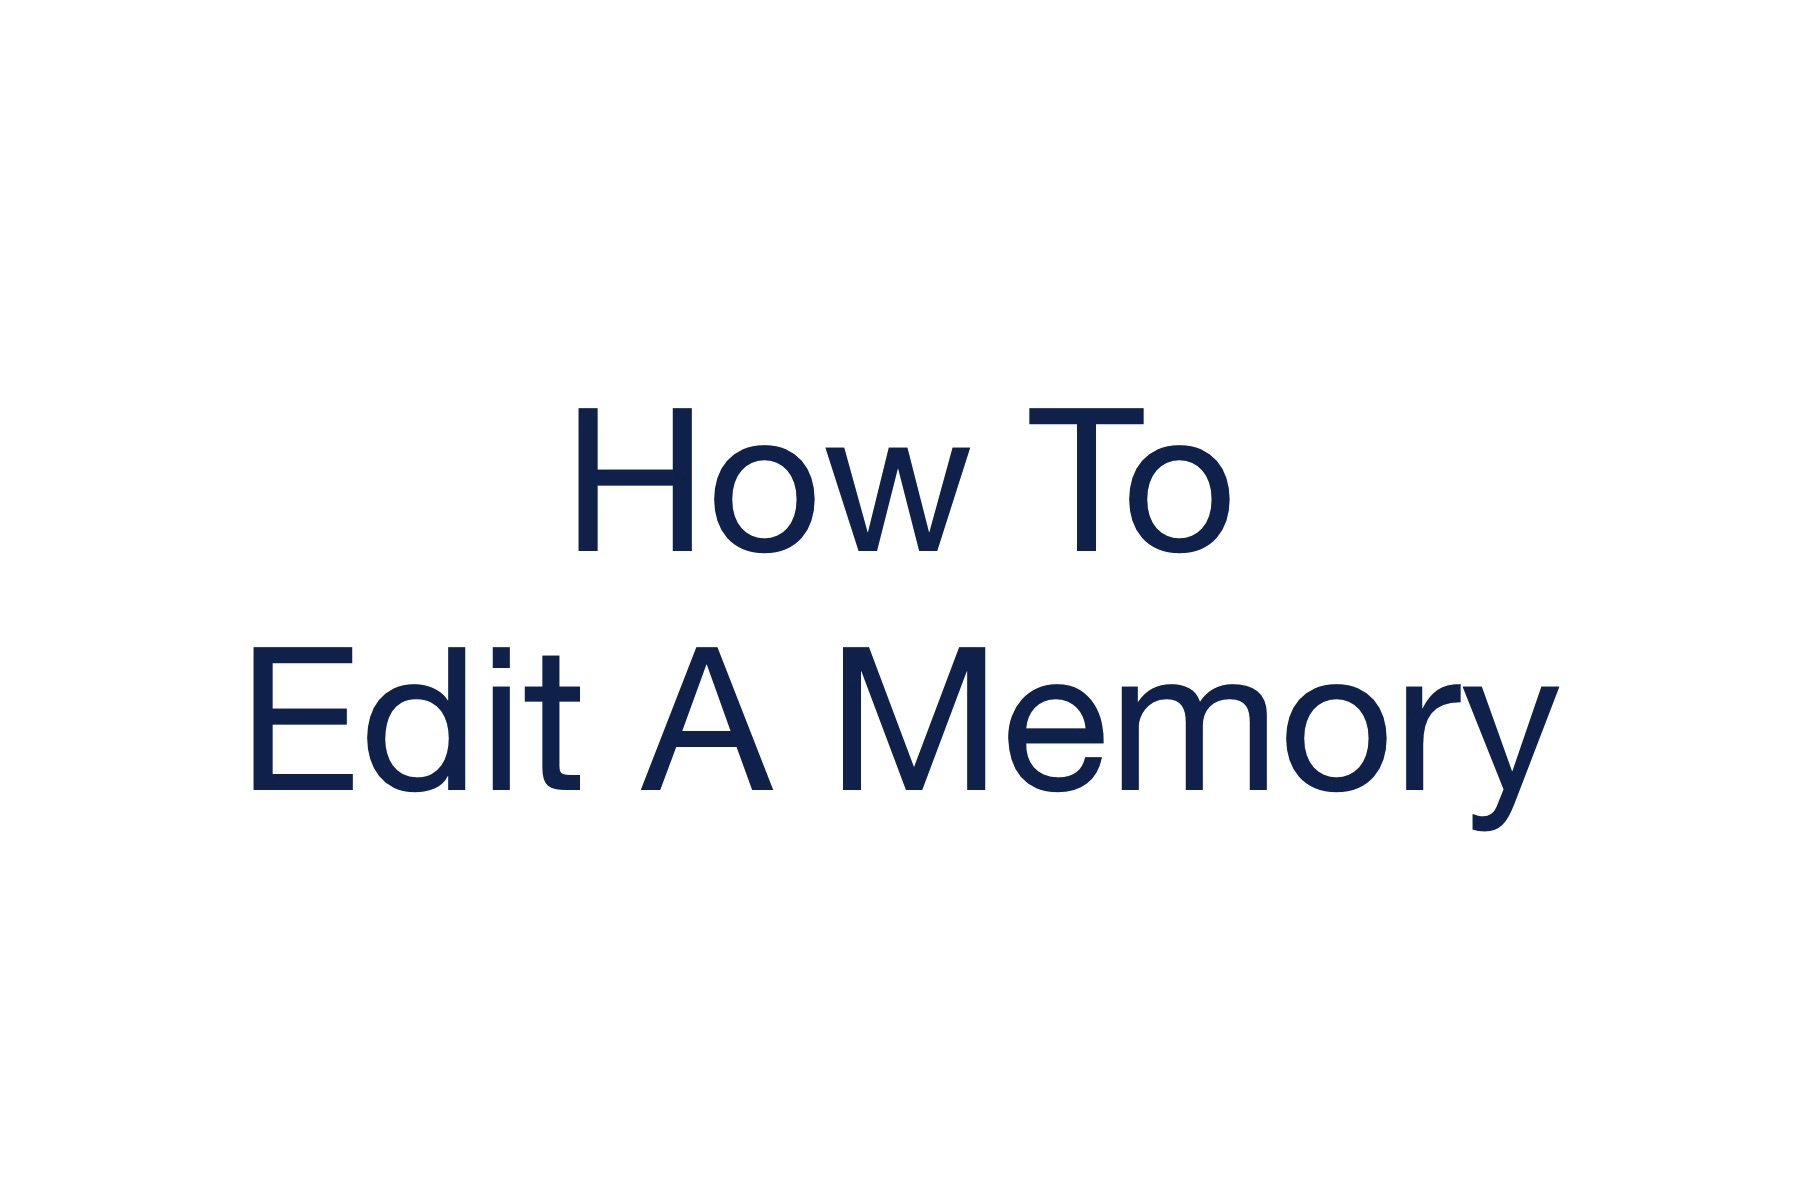 How to edit a memory in the Remembered app.